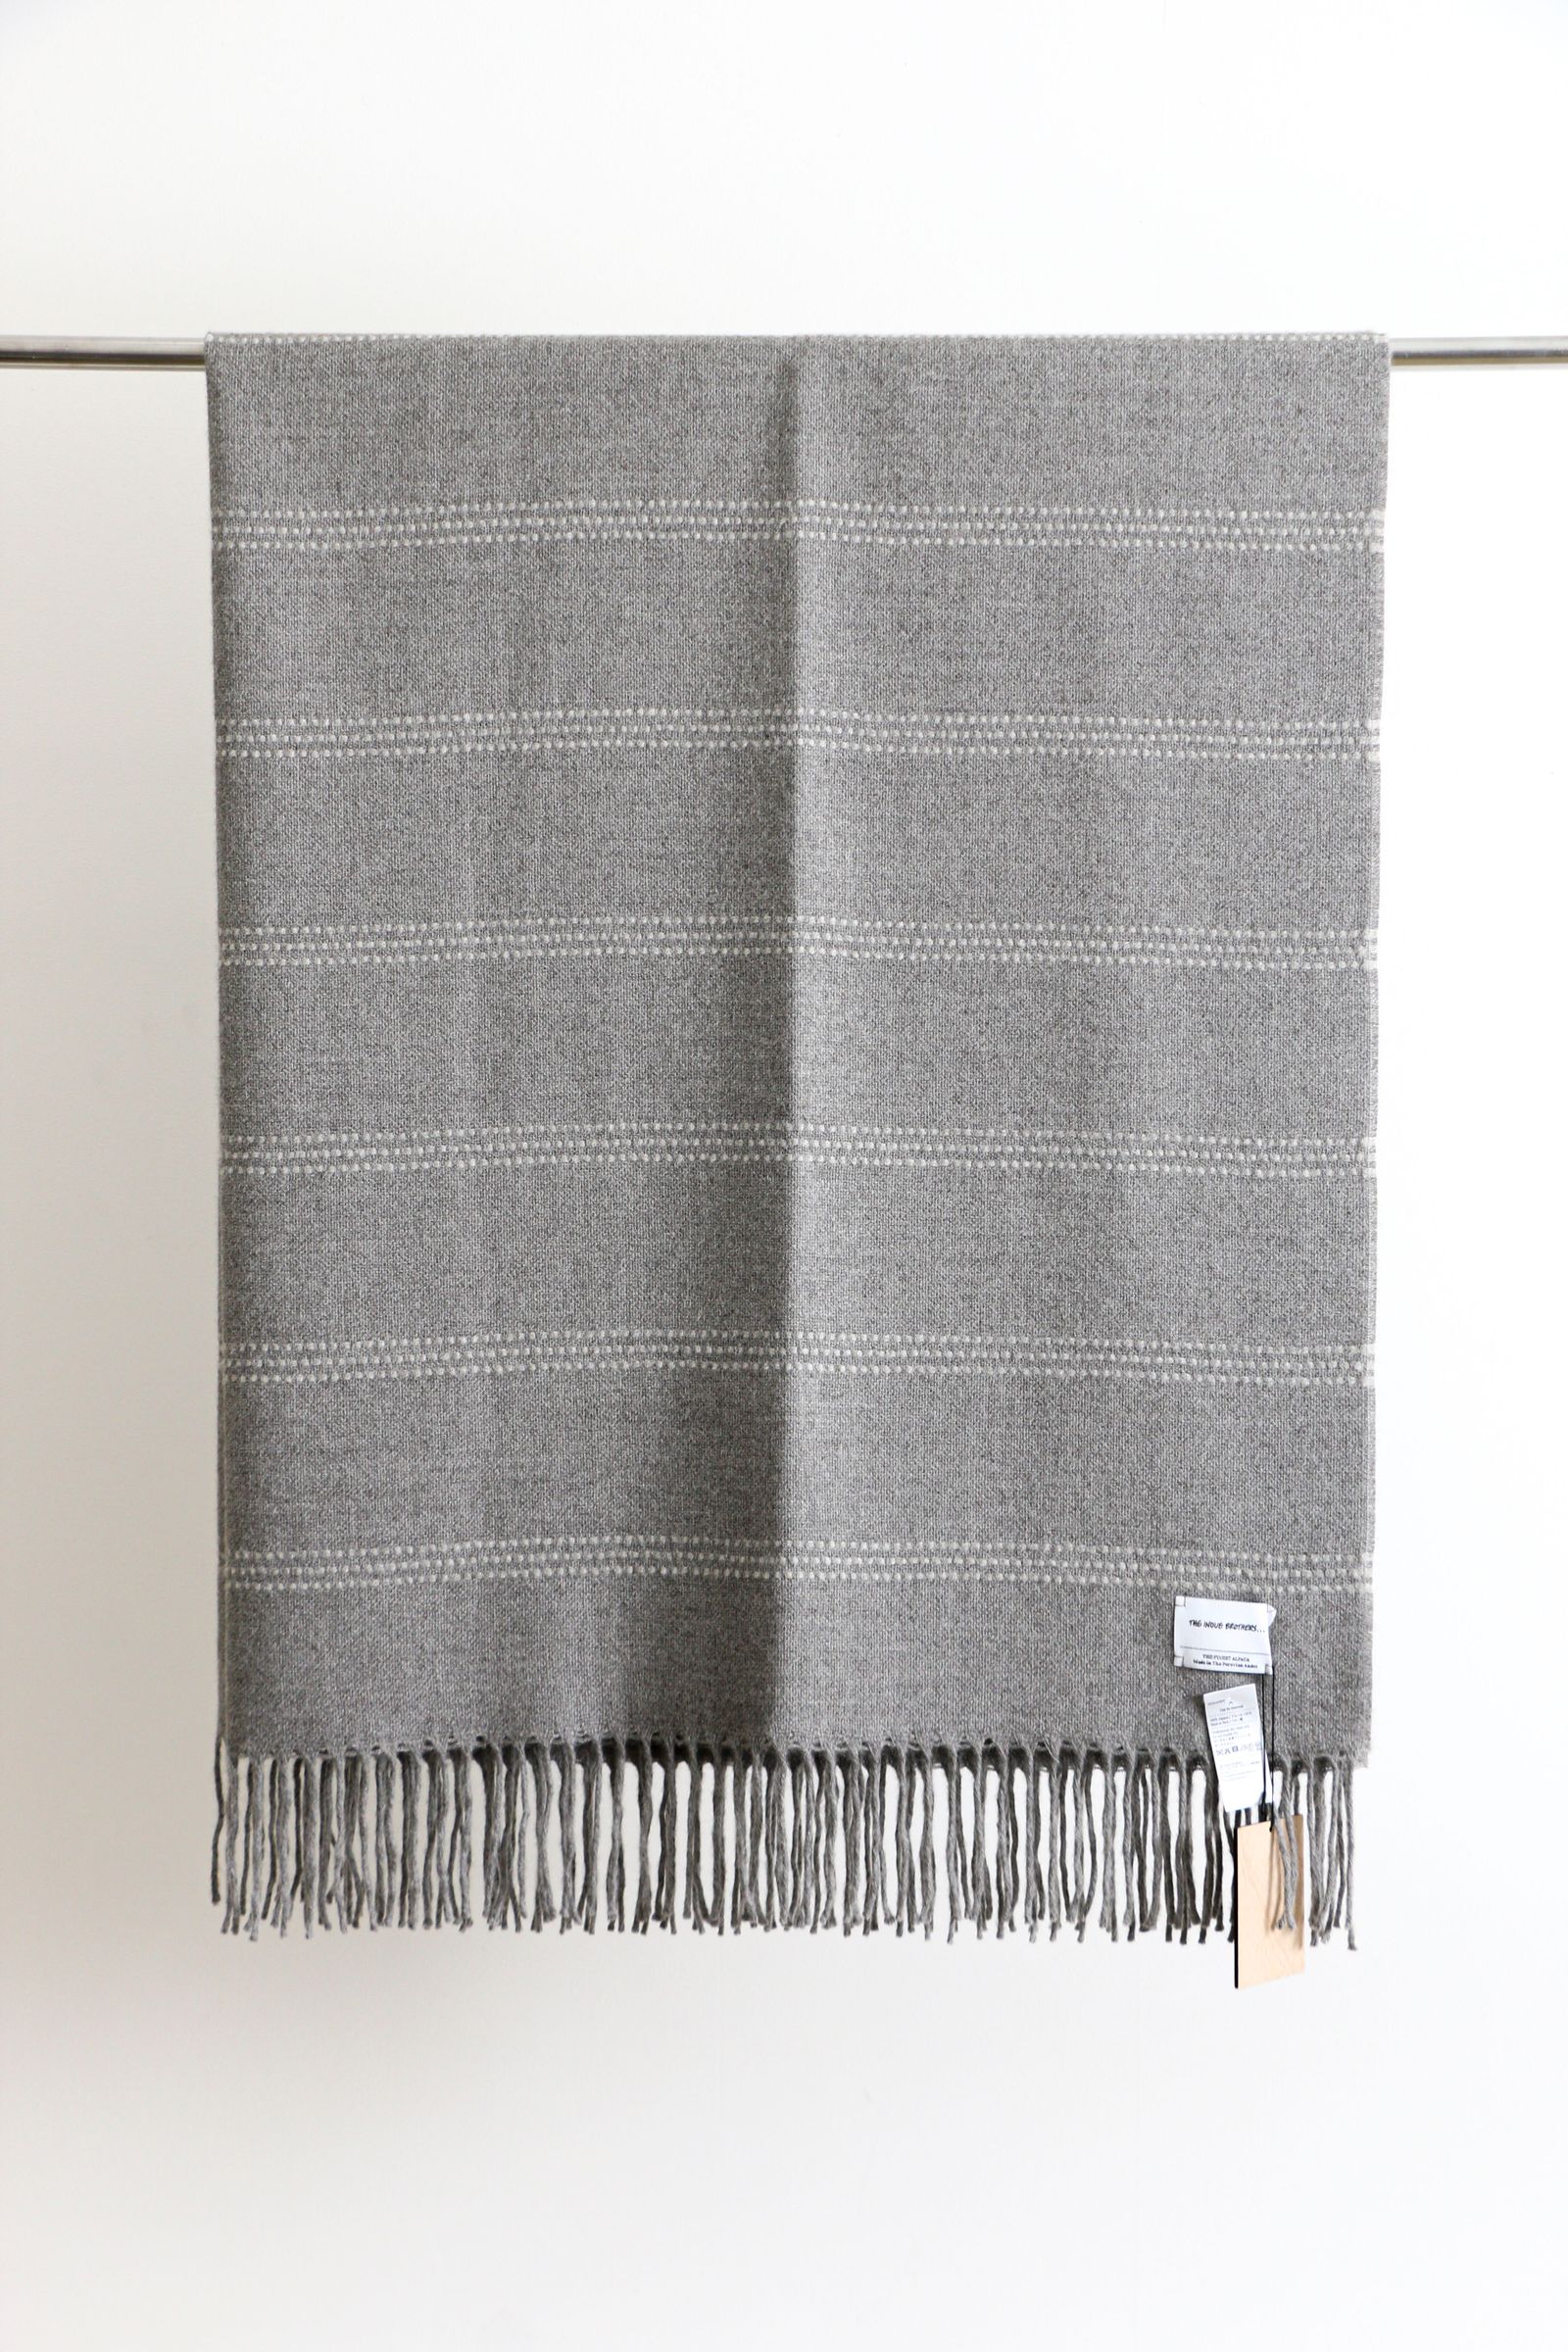 THE INOUE BROTHERS - THE INOUE BROTHERS Blanket Stripe Beige